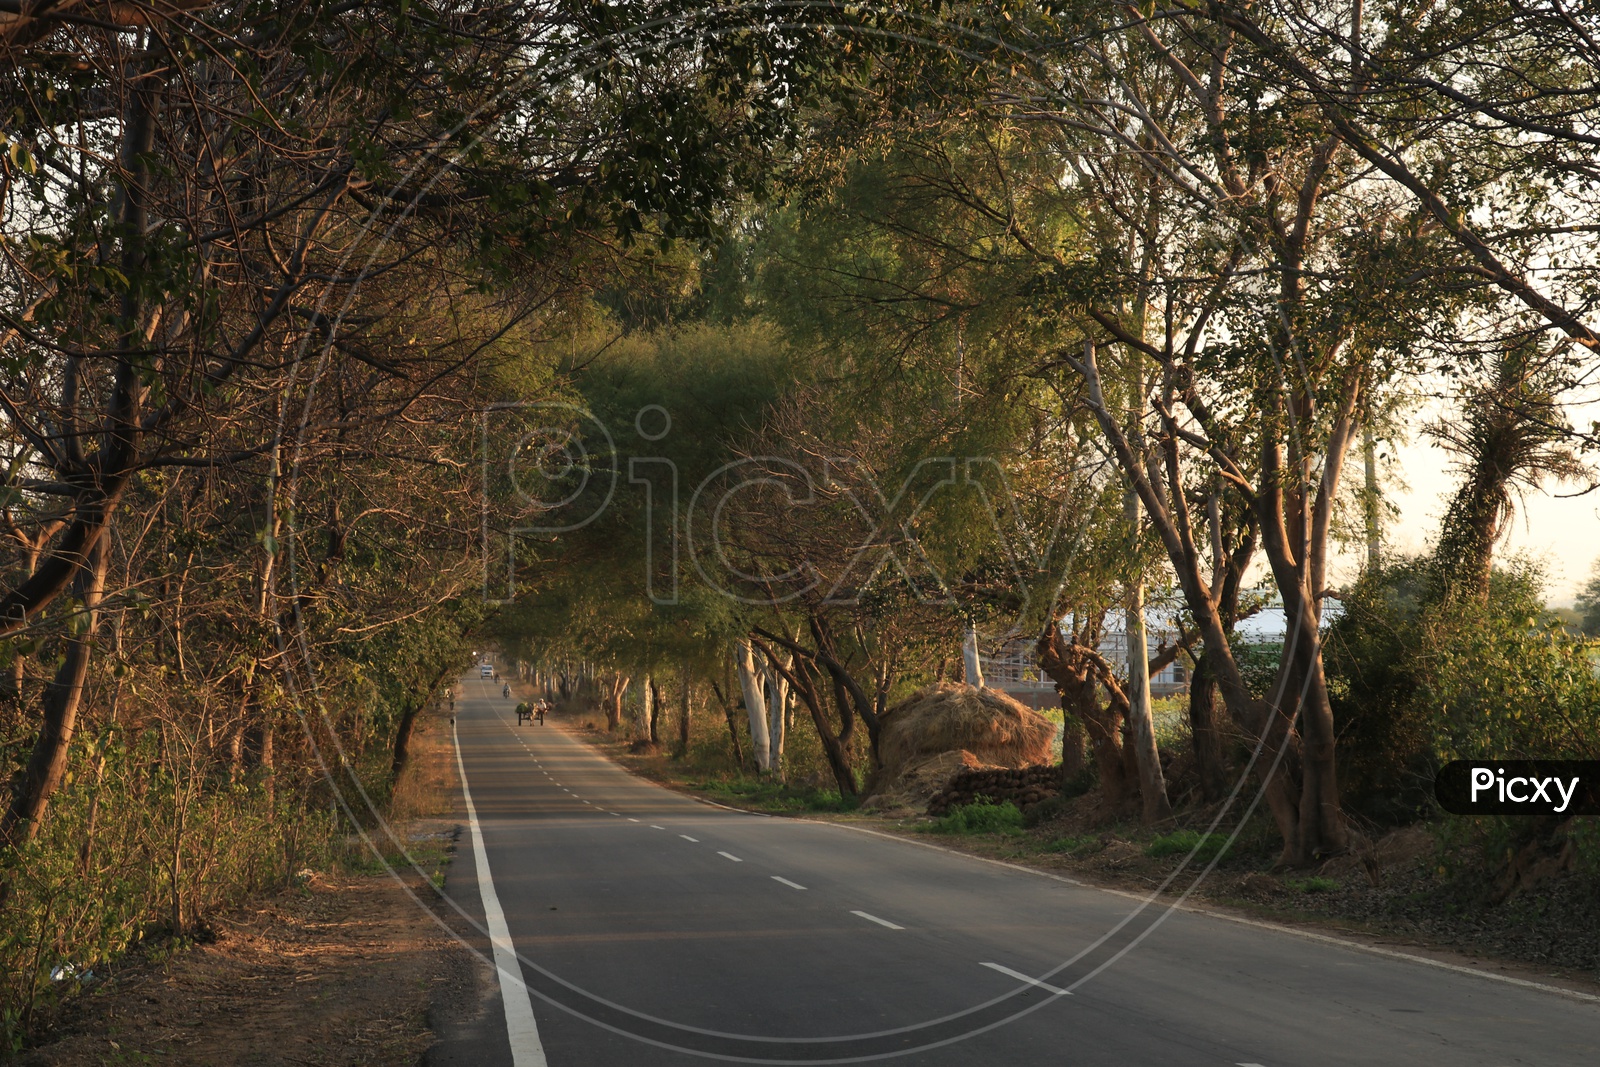 Road with trees on either side